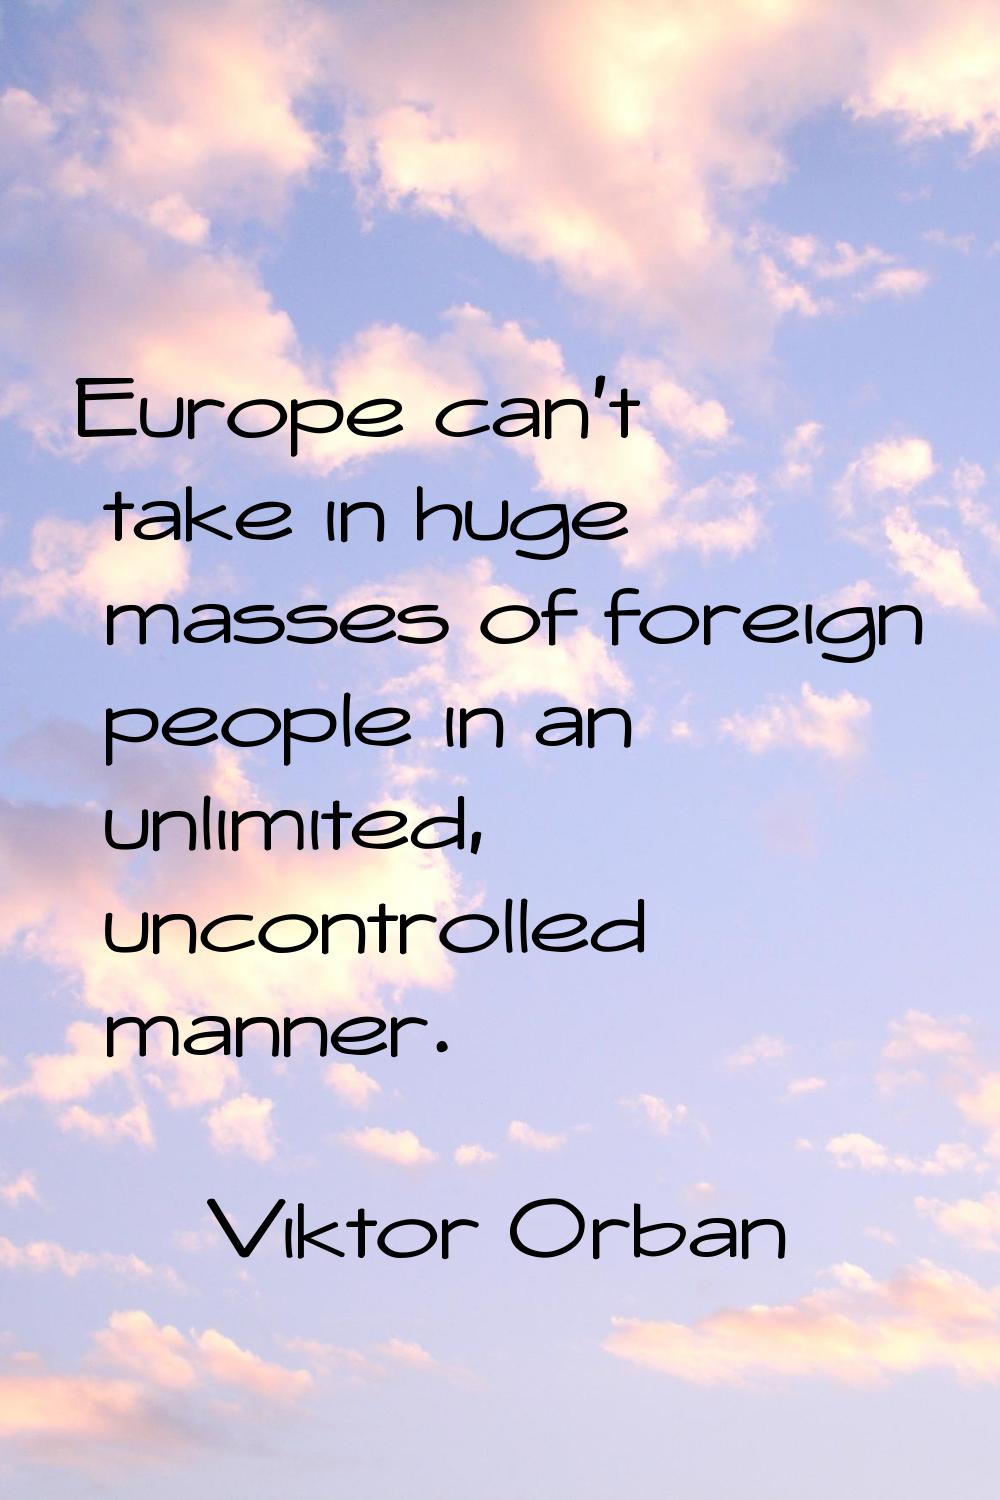 Europe can't take in huge masses of foreign people in an unlimited, uncontrolled manner.